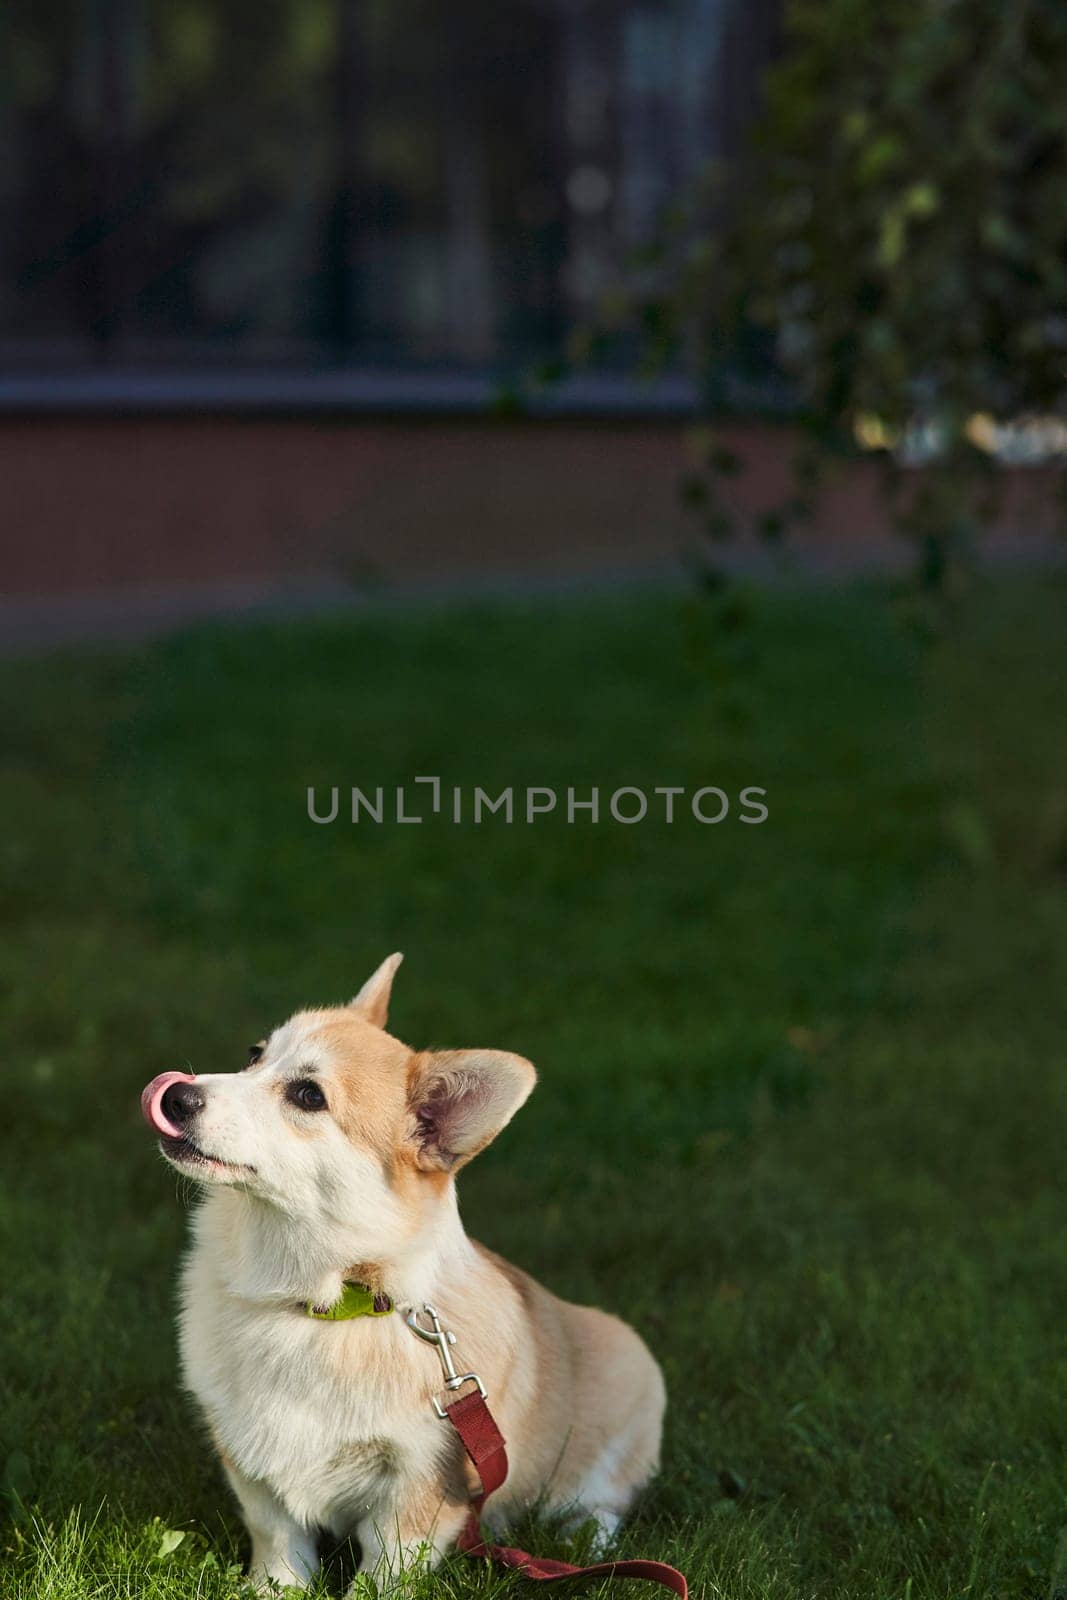 Welsh Corgi Pembroke dog sits on a manicured green lawn in a park in summer by driver-s